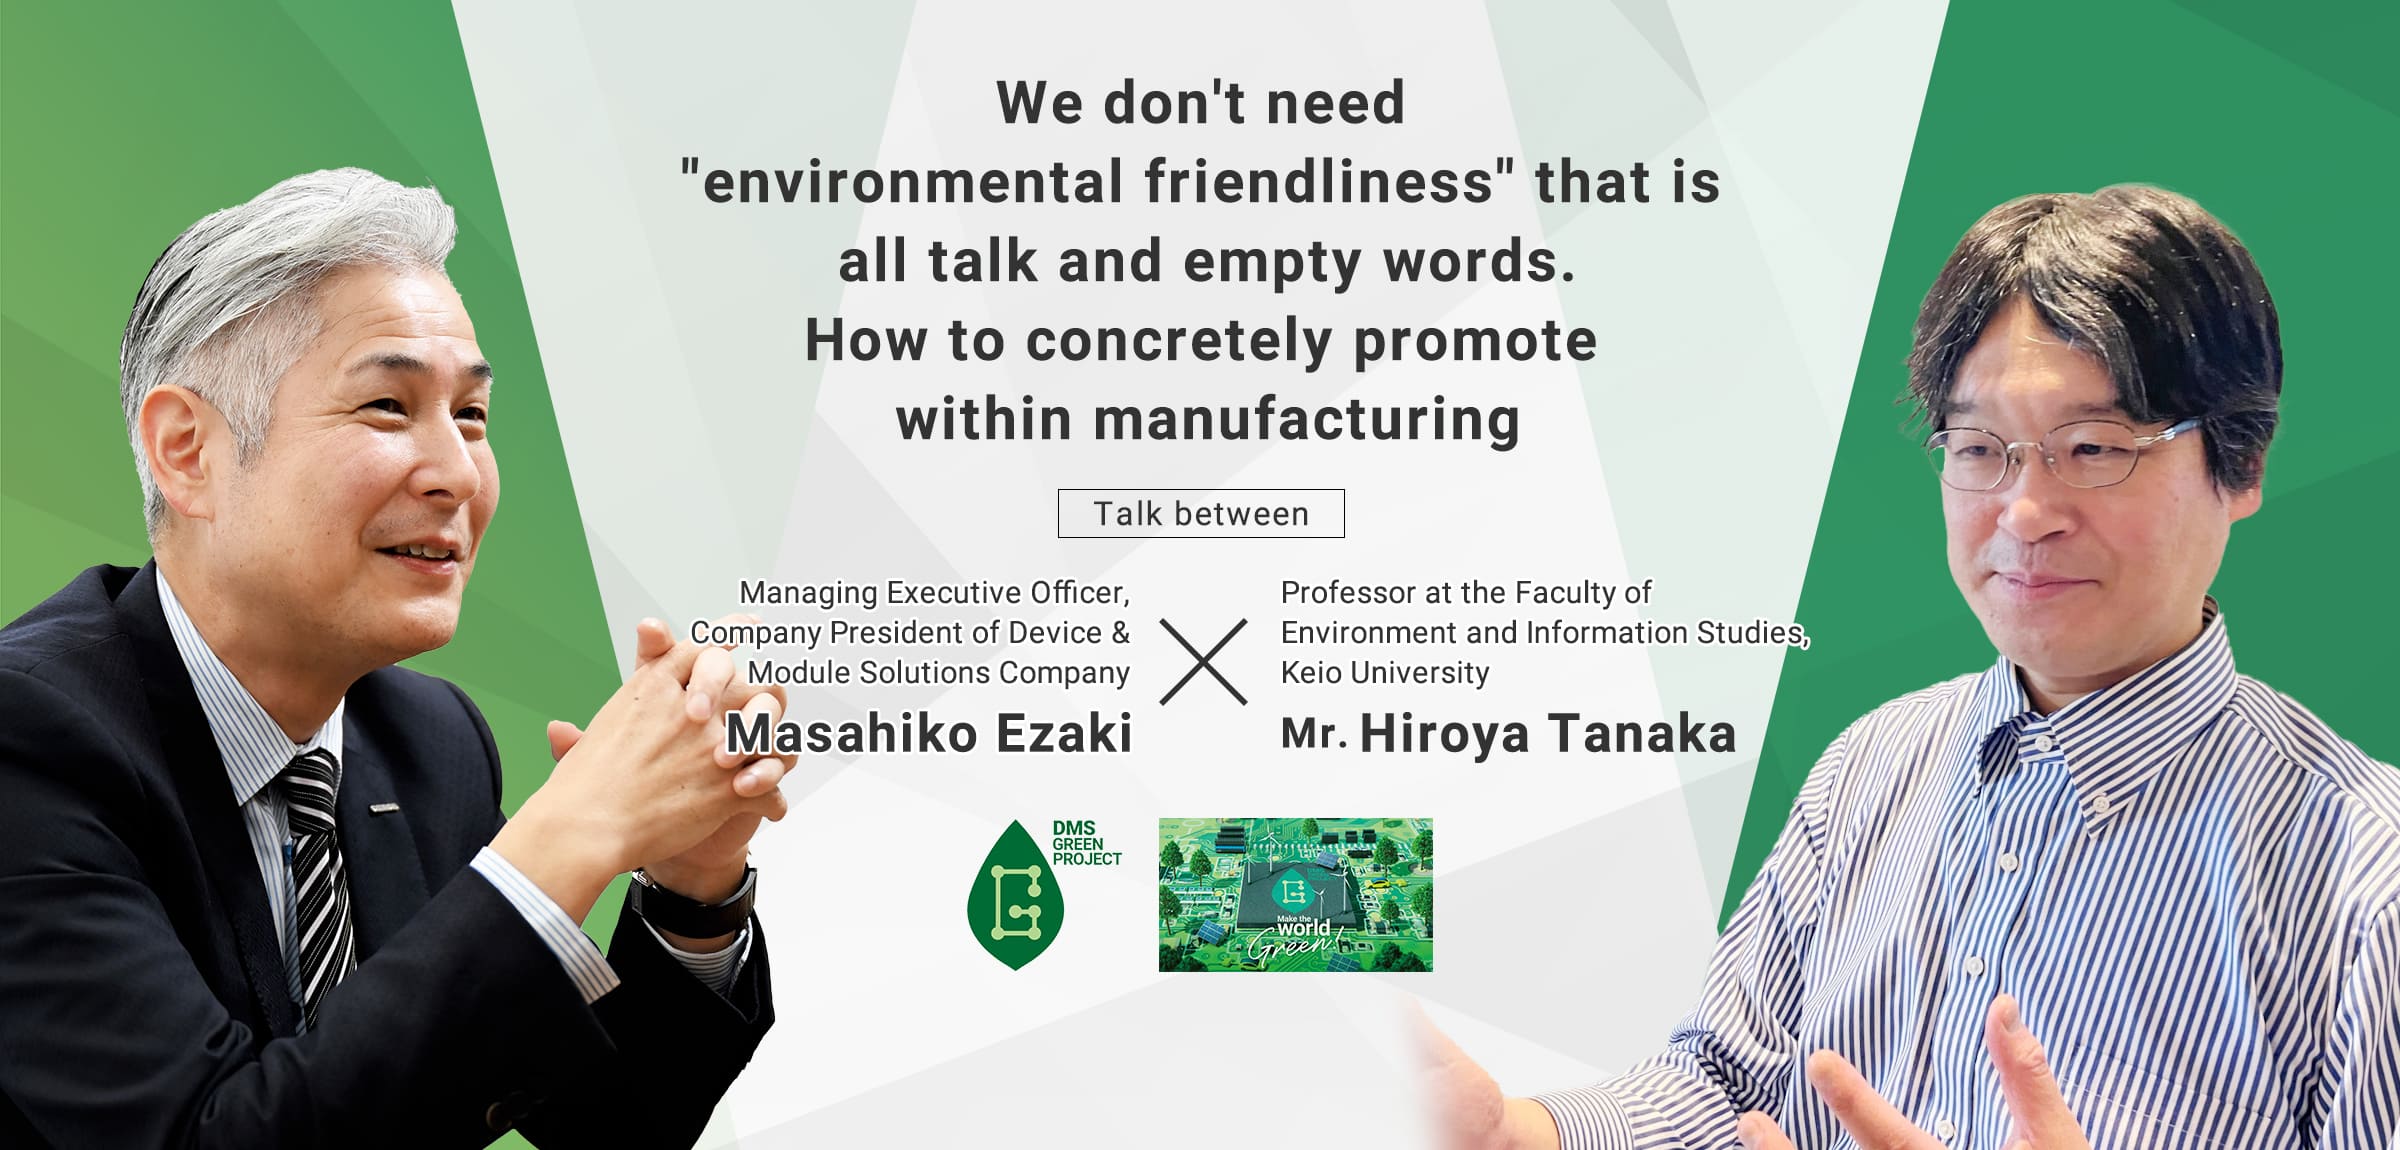 We don't need "environmental friendliness" that is all talk and empty words. How to concretely promote within manufacturing / Talk between Mr. Hiroya Tanaka Professor at the Faculty of Environment and Information Studies, Keio University × Mr. Masahiko Ezaki Managing Executive Officer, Company President of Device & Module Solutions Company